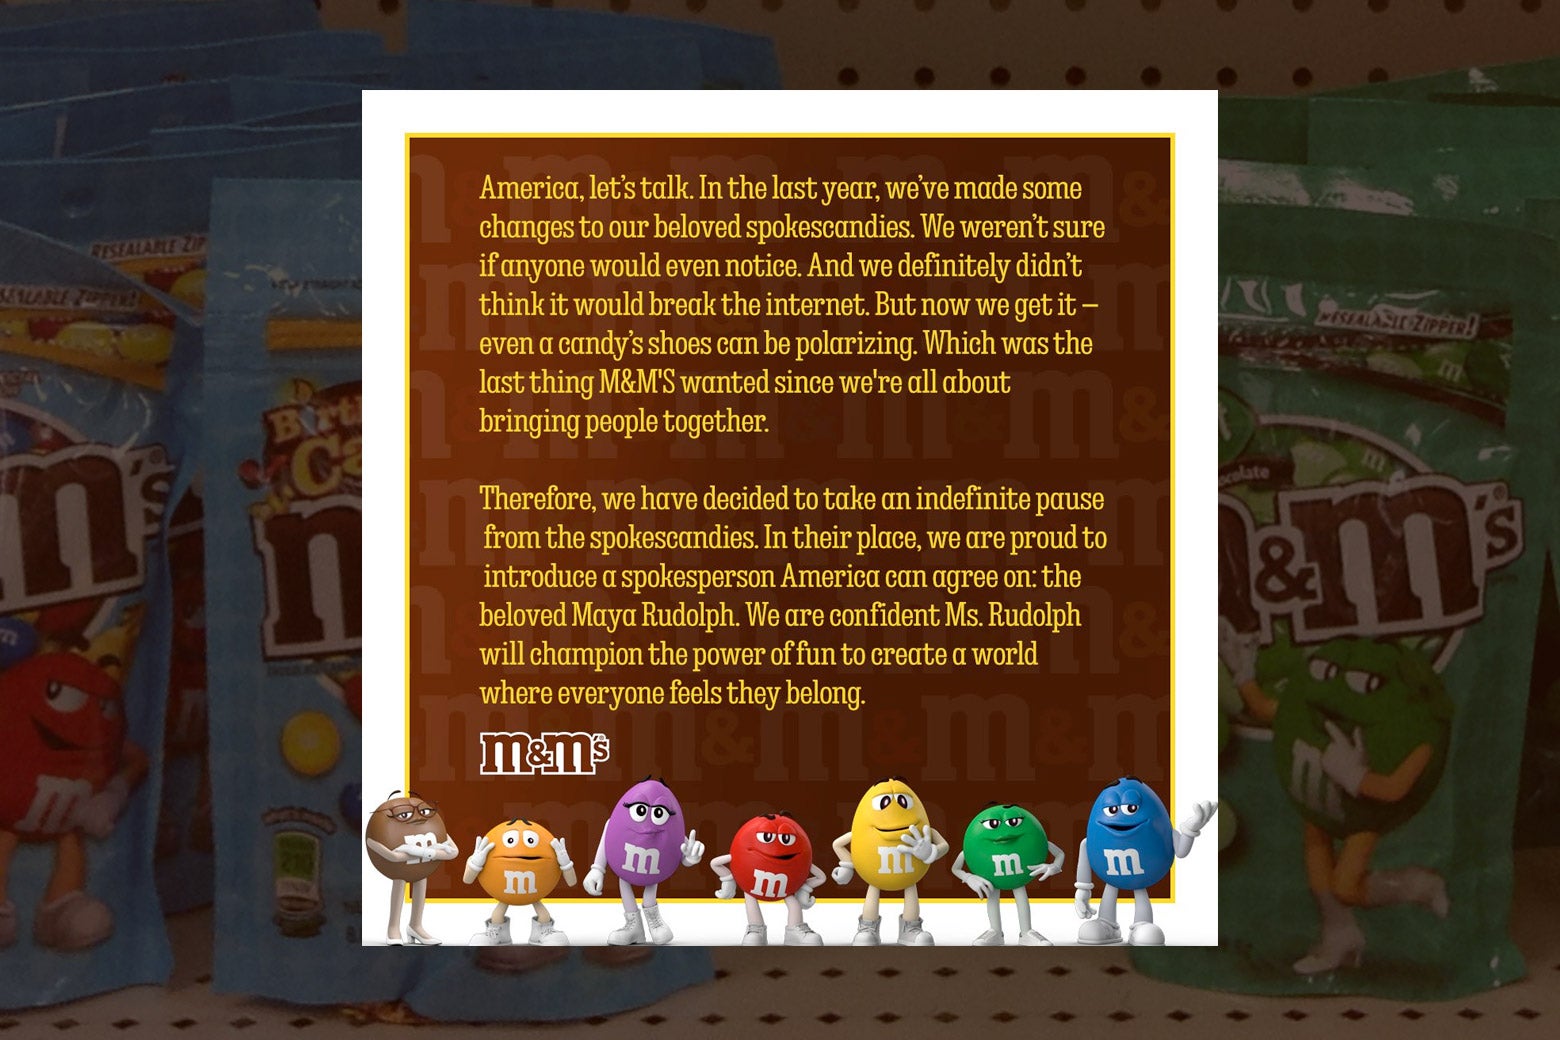 A tweet retracting the use of the M&M spokescandies, superimposed over a background of M&Ms packages. 